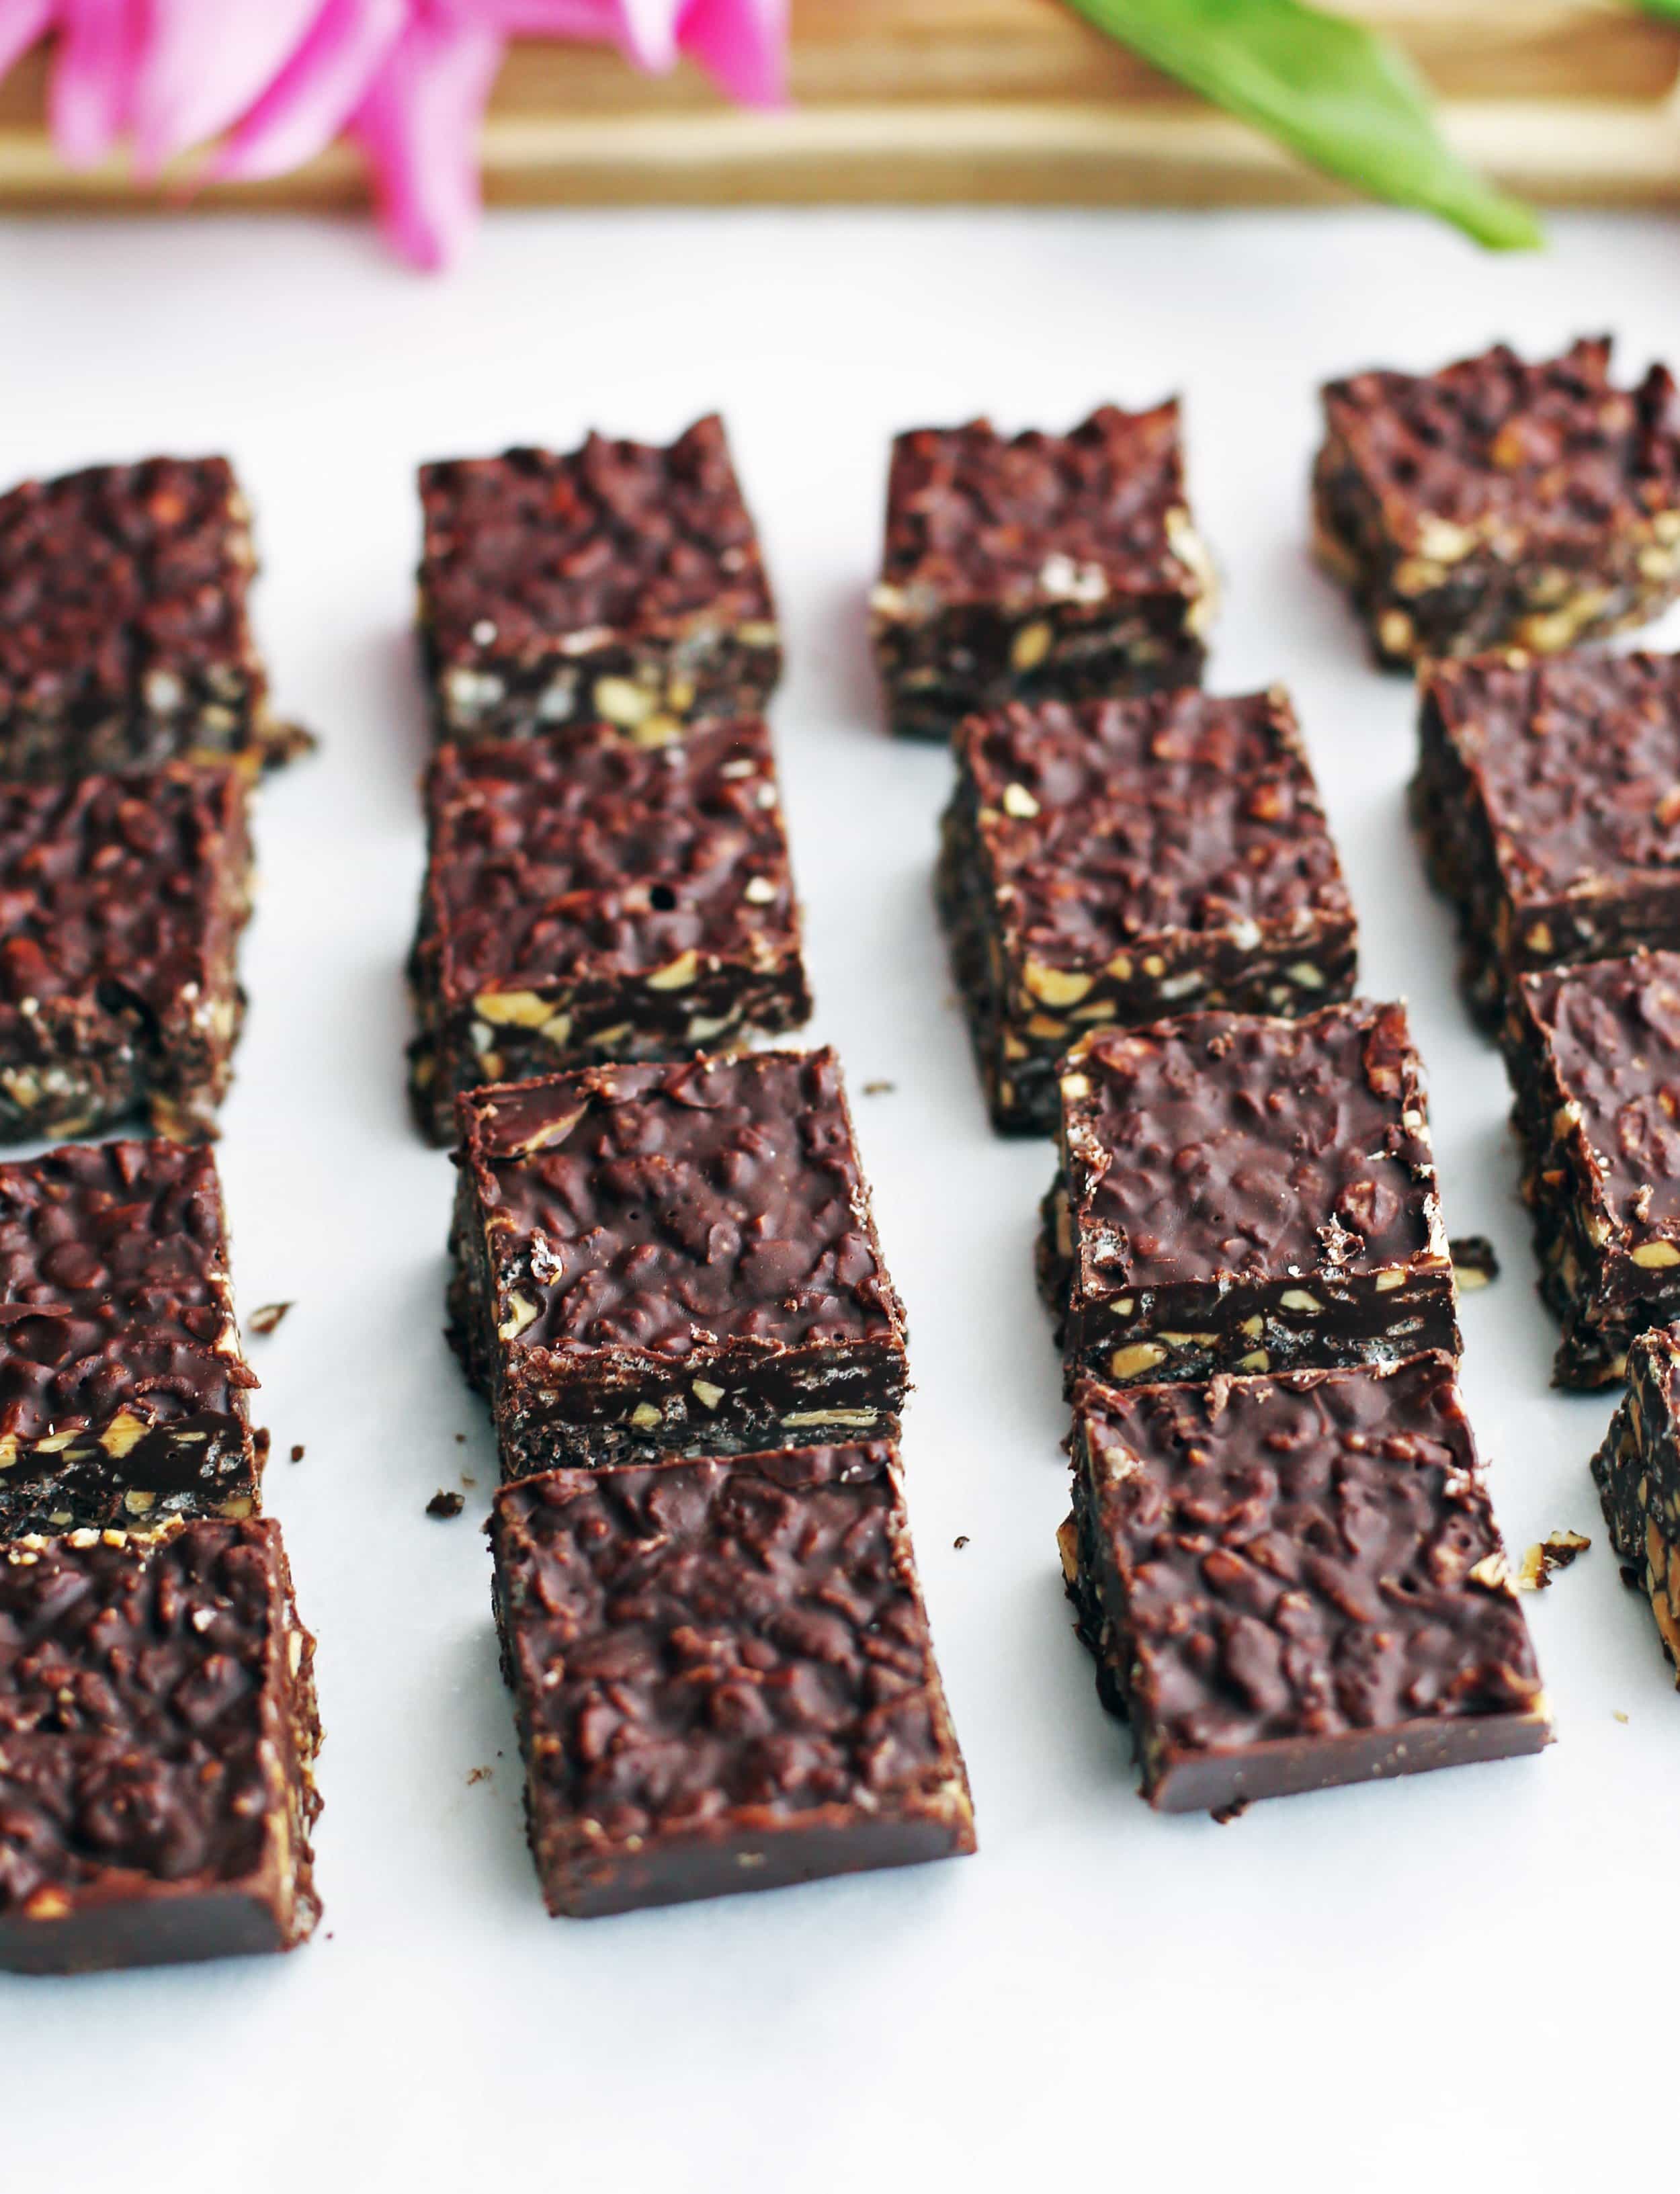 No-bake Peanut Butter Chocolate Crunch Bars on white parchment paper.